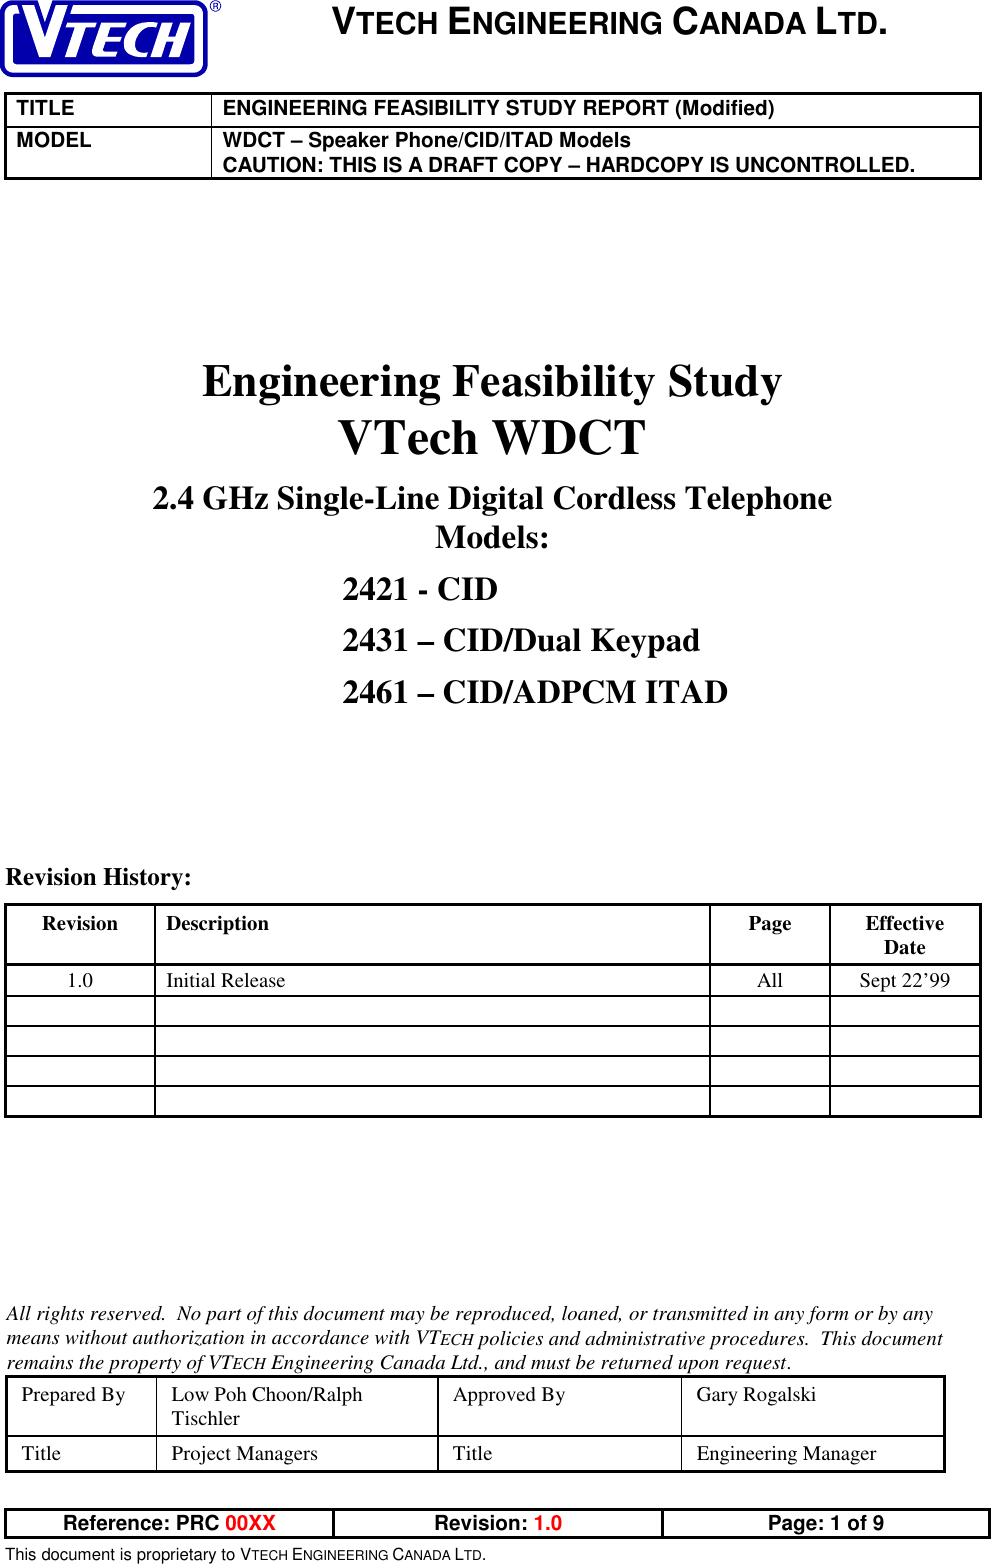 VTECH ENGINEERING CANADA LTD.TITLE ENGINEERING FEASIBILITY STUDY REPORT (Modified)MODEL WDCT – Speaker Phone/CID/ITAD ModelsCAUTION: THIS IS A DRAFT COPY – HARDCOPY IS UNCONTROLLED.Reference: PRC 00XX Revision: 1.0 Page: 1 of 9This document is proprietary to VTECH ENGINEERING CANADA LTD.Engineering Feasibility StudyVTech WDCT2.4 GHz Single-Line Digital Cordless TelephoneModels:2421 - CID2431 – CID/Dual Keypad2461 – CID/ADPCM ITADRevision History:Revision Description Page EffectiveDate1.0 Initial Release All Sept 22’99All rights reserved.  No part of this document may be reproduced, loaned, or transmitted in any form or by anymeans without authorization in accordance with VTECH policies and administrative procedures.  This documentremains the property of VTECH Engineering Canada Ltd., and must be returned upon request.Prepared By Low Poh Choon/RalphTischler Approved By Gary RogalskiTitle Project Managers Title Engineering Manager